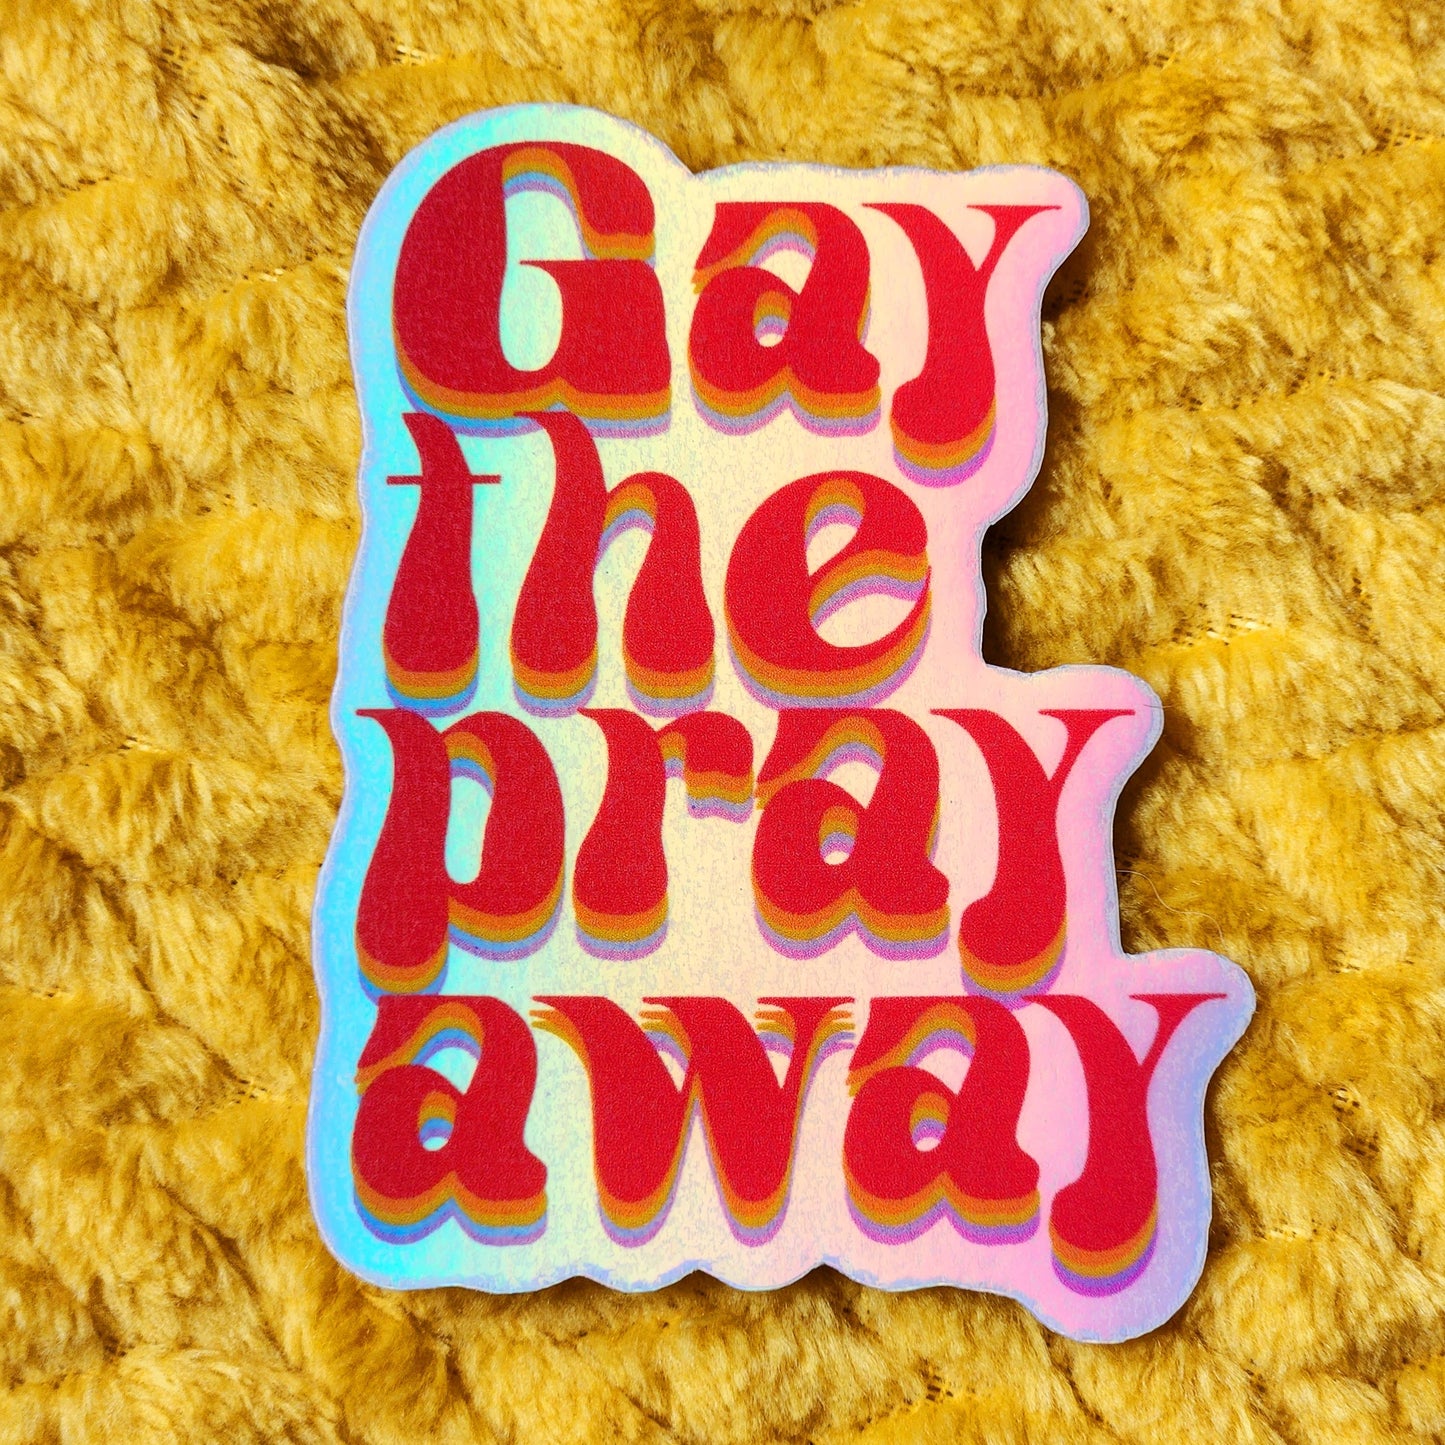 Gay the pray away sticker: Design 2 Holographic